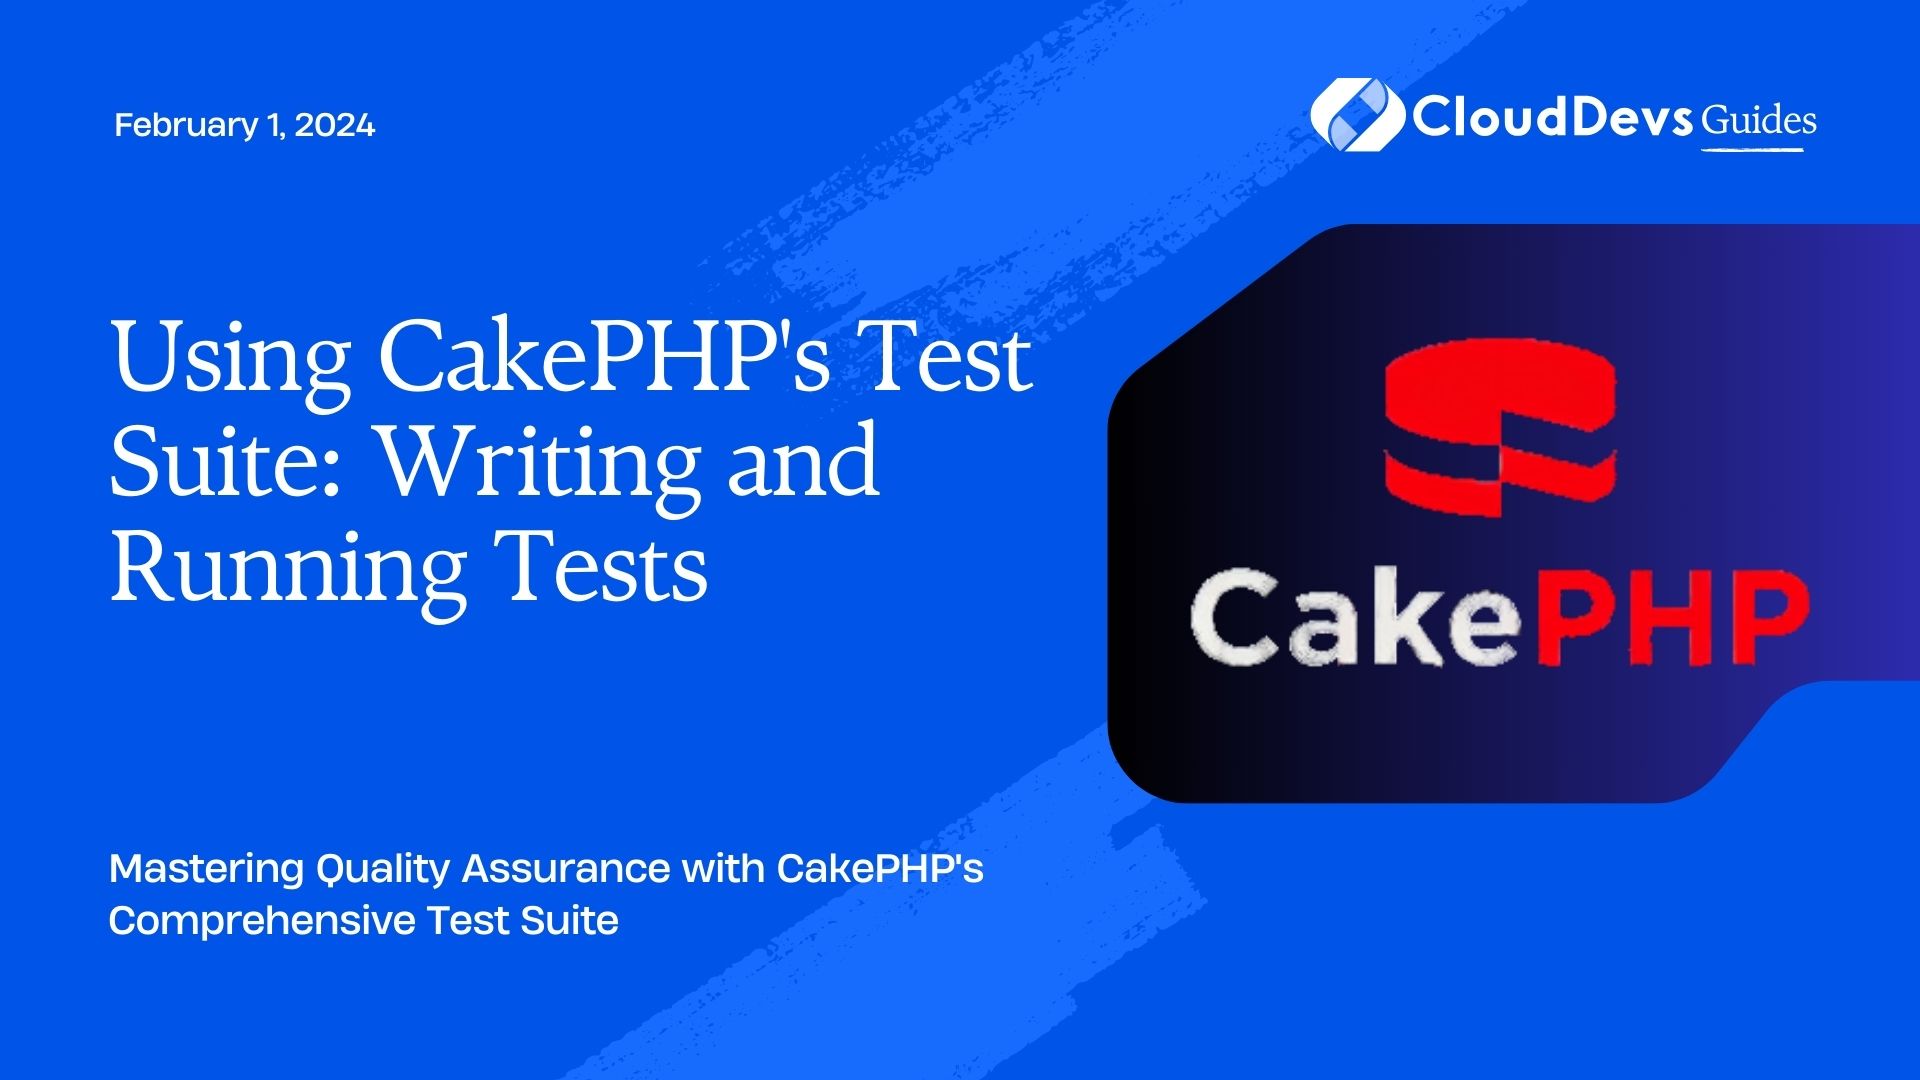 Using CakePHP's Test Suite: Writing and Running Tests